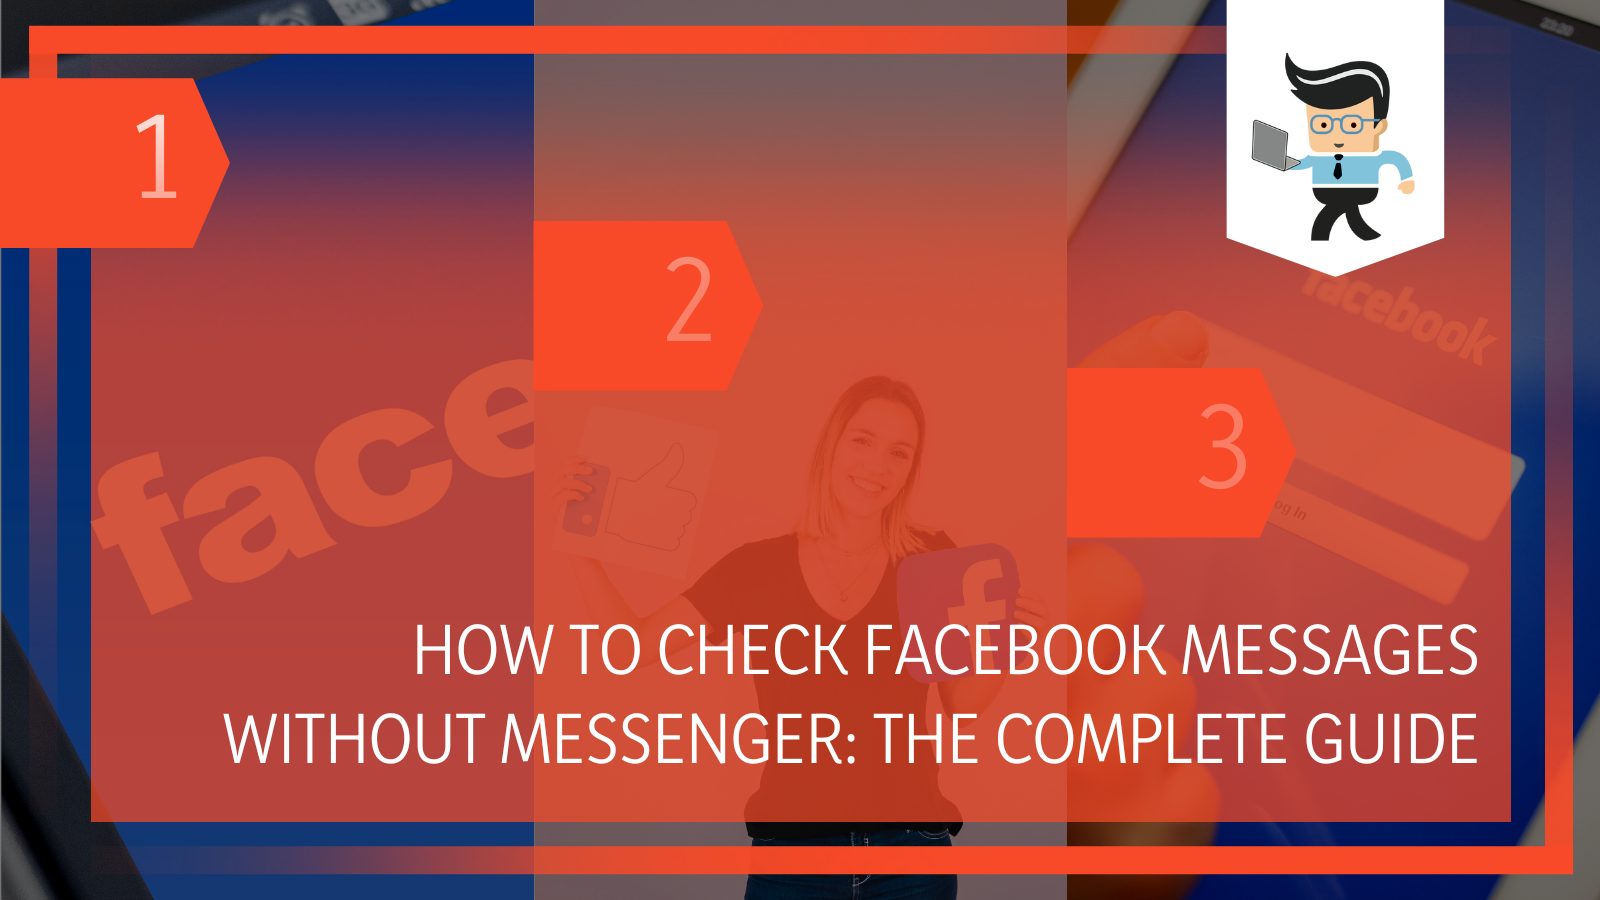 Check Facebook Messages Without Messenger